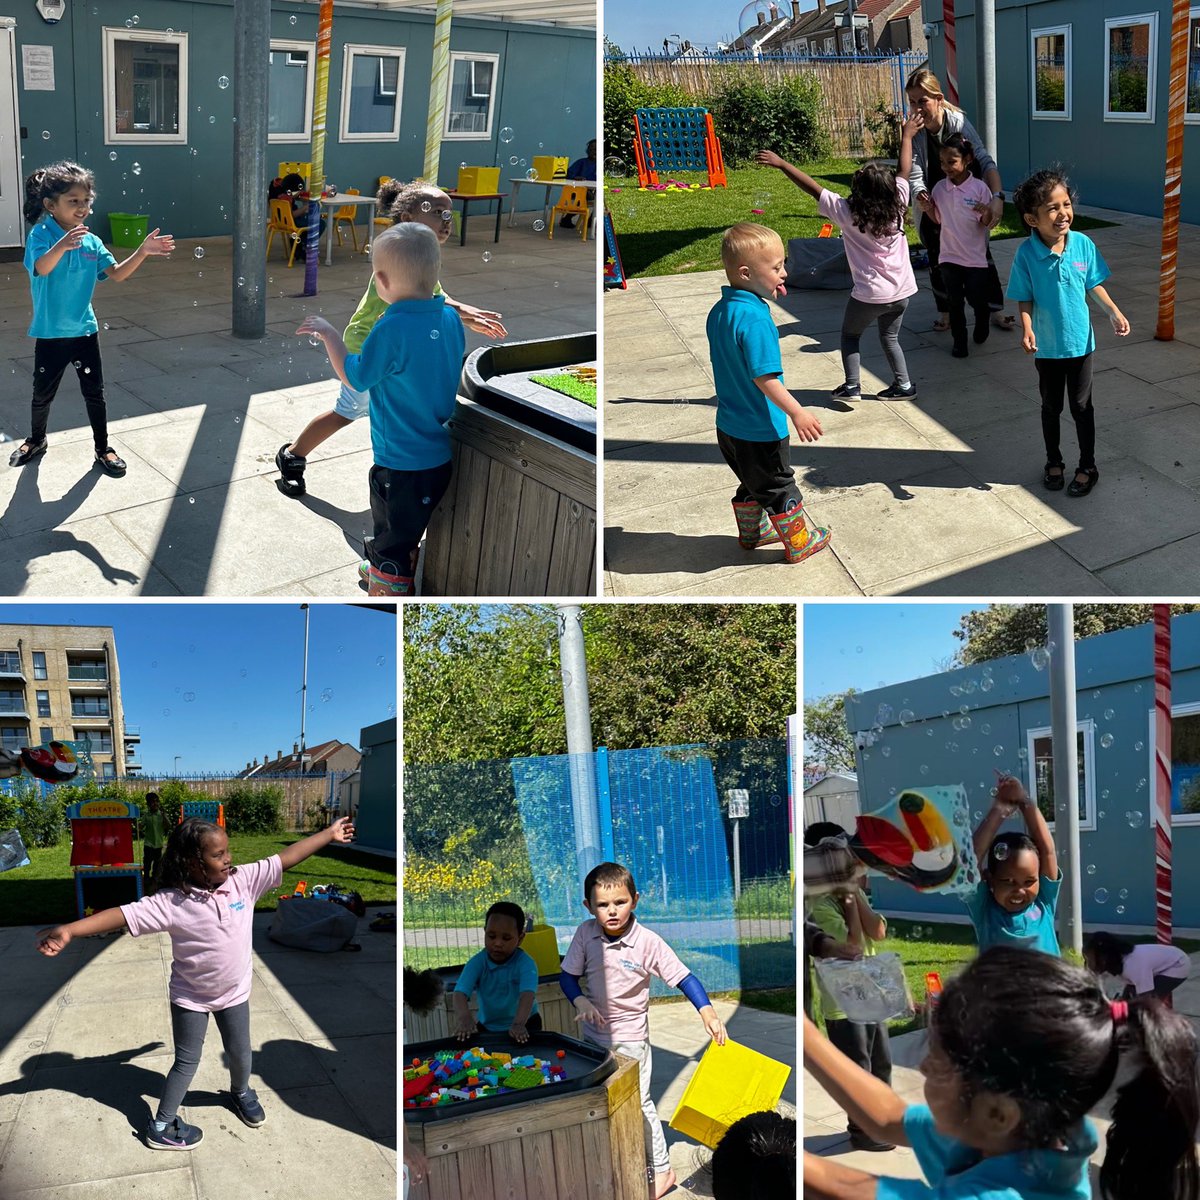 🫧 Bubbles can be such great fun. For Bumble Bees it’s exciting, attention grabbing and gives lots of opportunity for talking. We chased the bubbles and tried to pop them all shouting ‘pop the bubbles’ as we go 🫧 @Lauren_TVI @TVInfants @AdamDobsonTVI